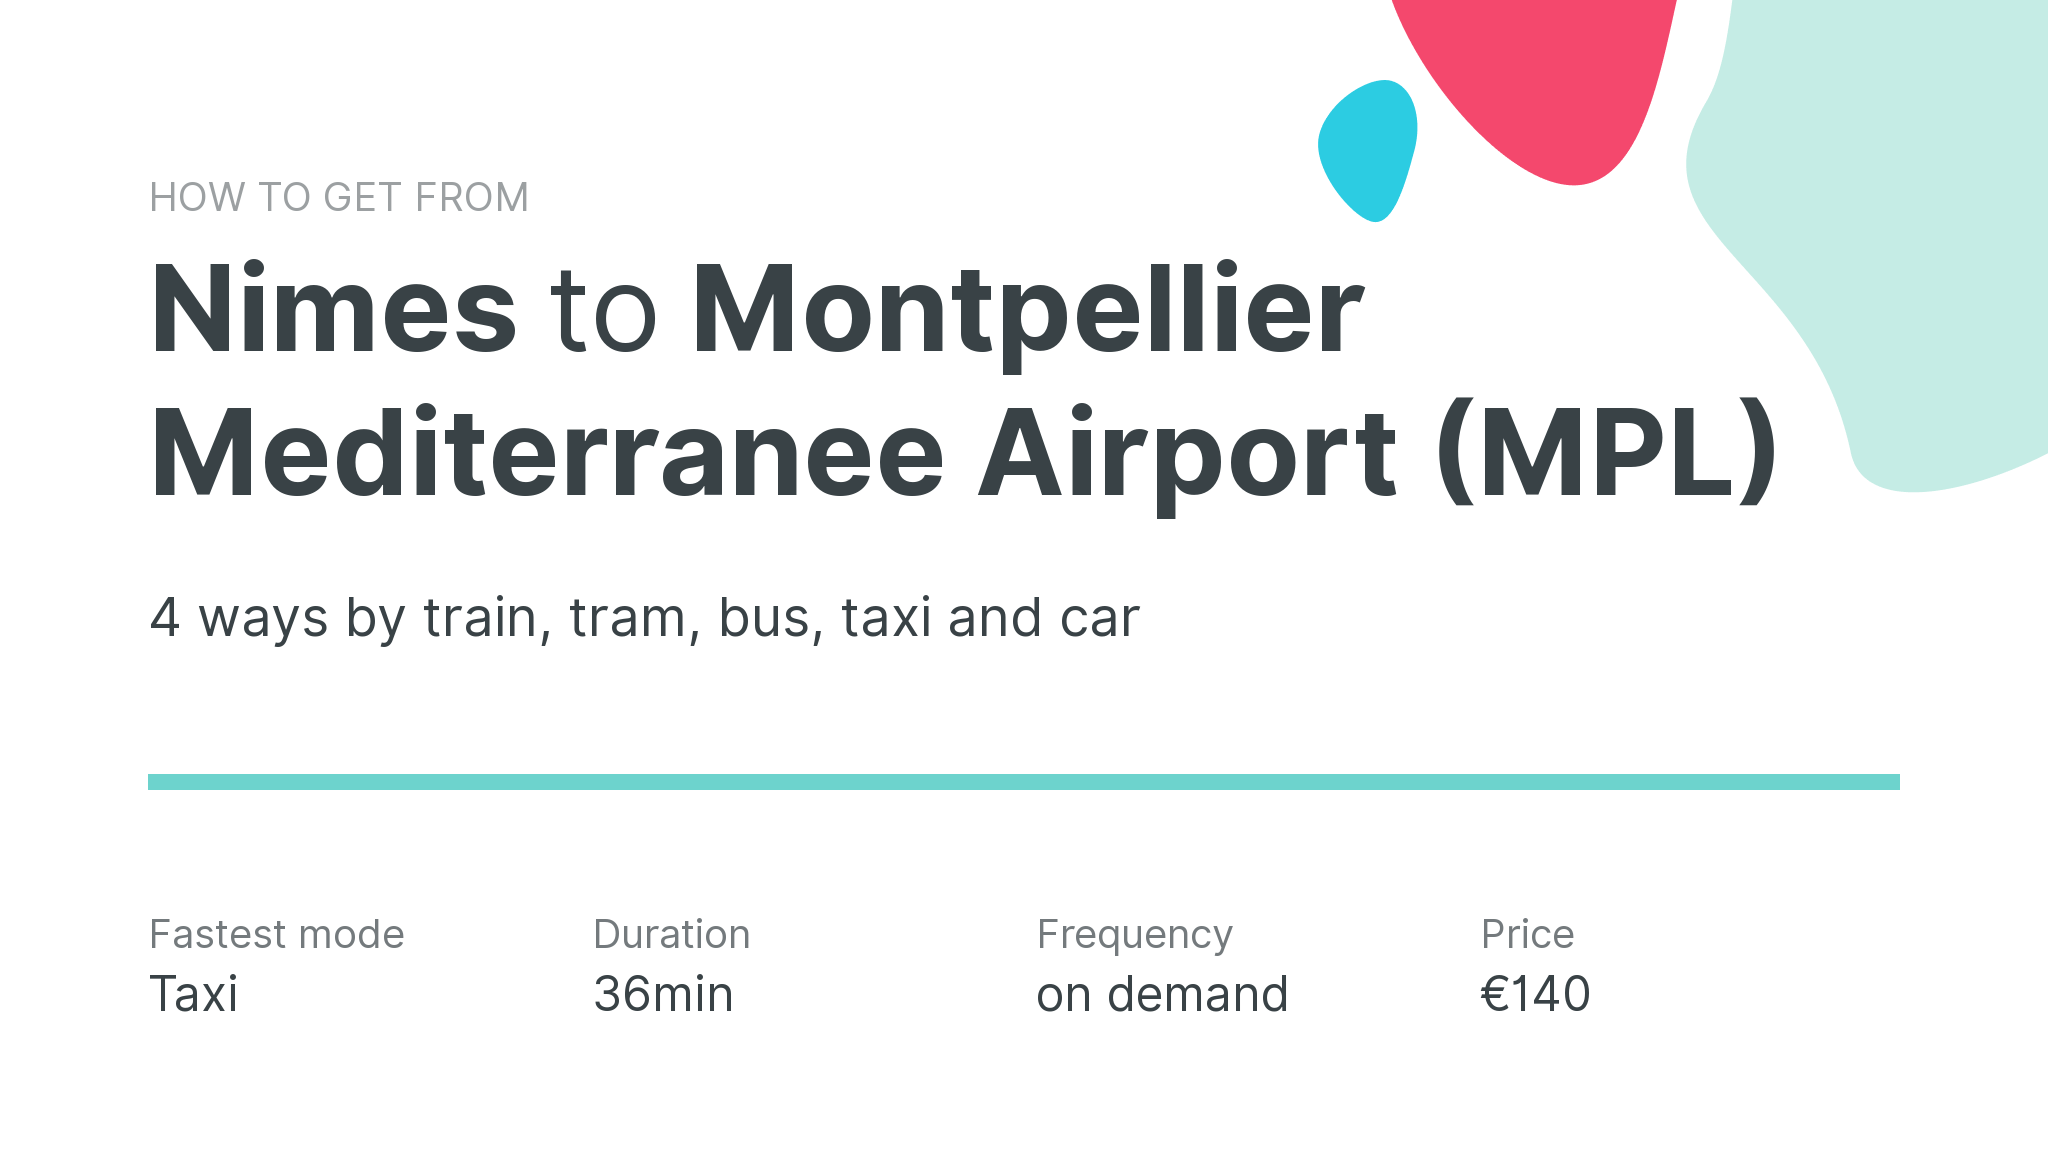 How do I get from Nimes to Montpellier Mediterranee Airport (MPL)